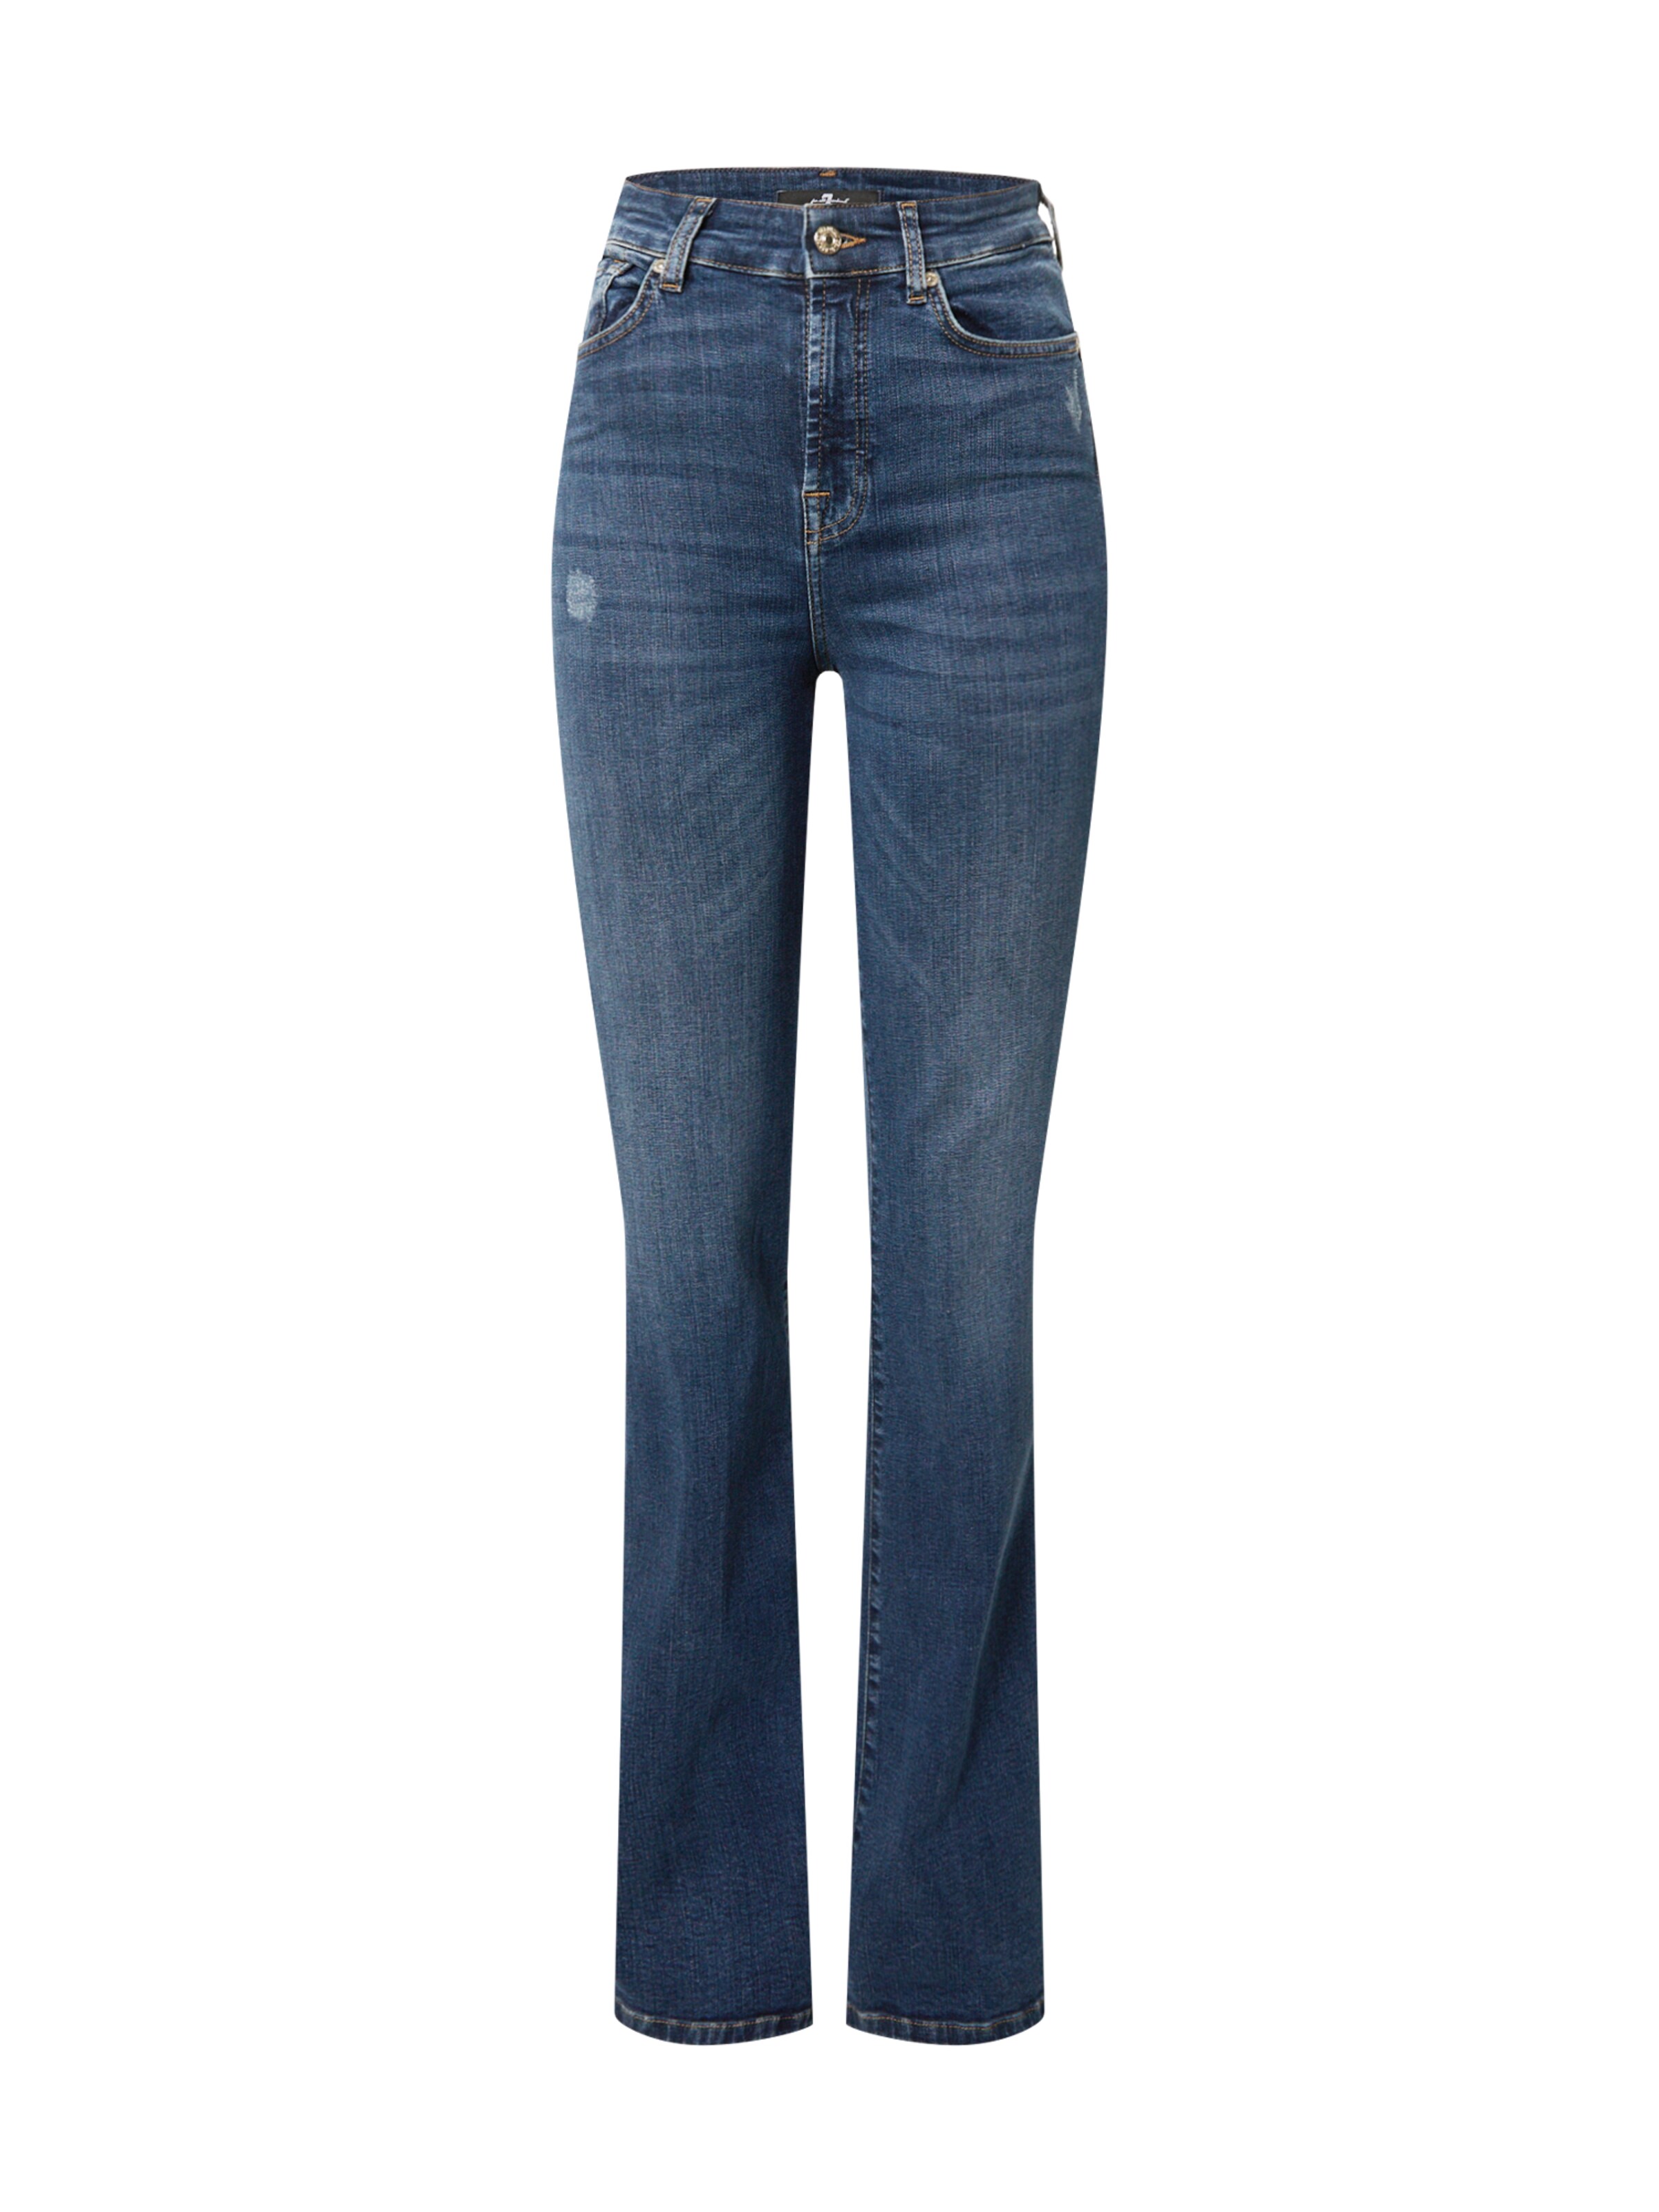 7 for all mankind Jeans in Blu 